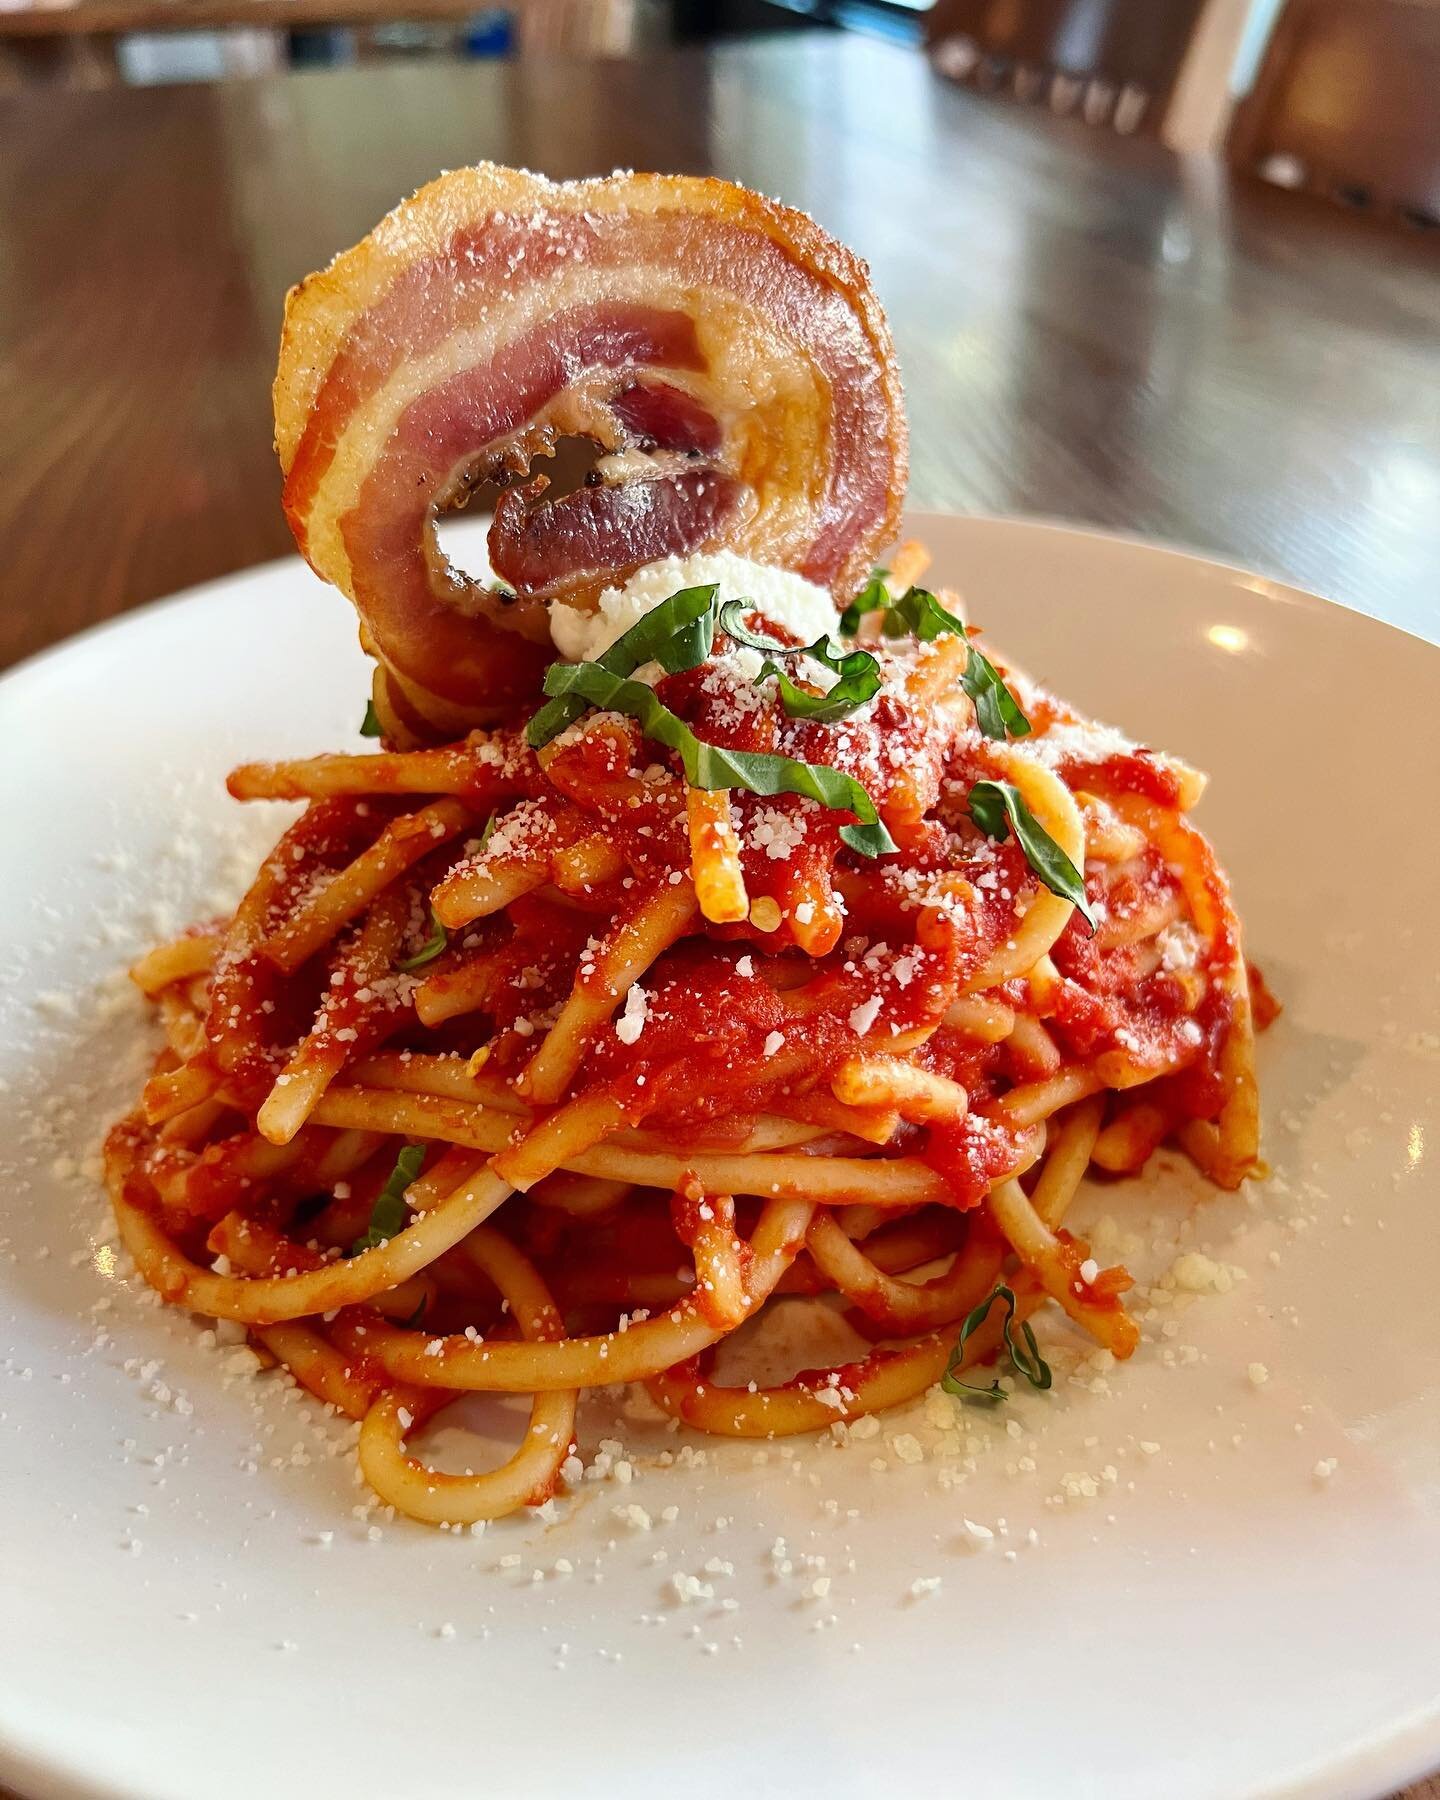 Tonight&rsquo;s feature: bucatini all'amatriciana 

This dish features house made spicy red sauce, pancetta, finished with whipped pecorino romano ricotta, and a crispy pancetta wheel